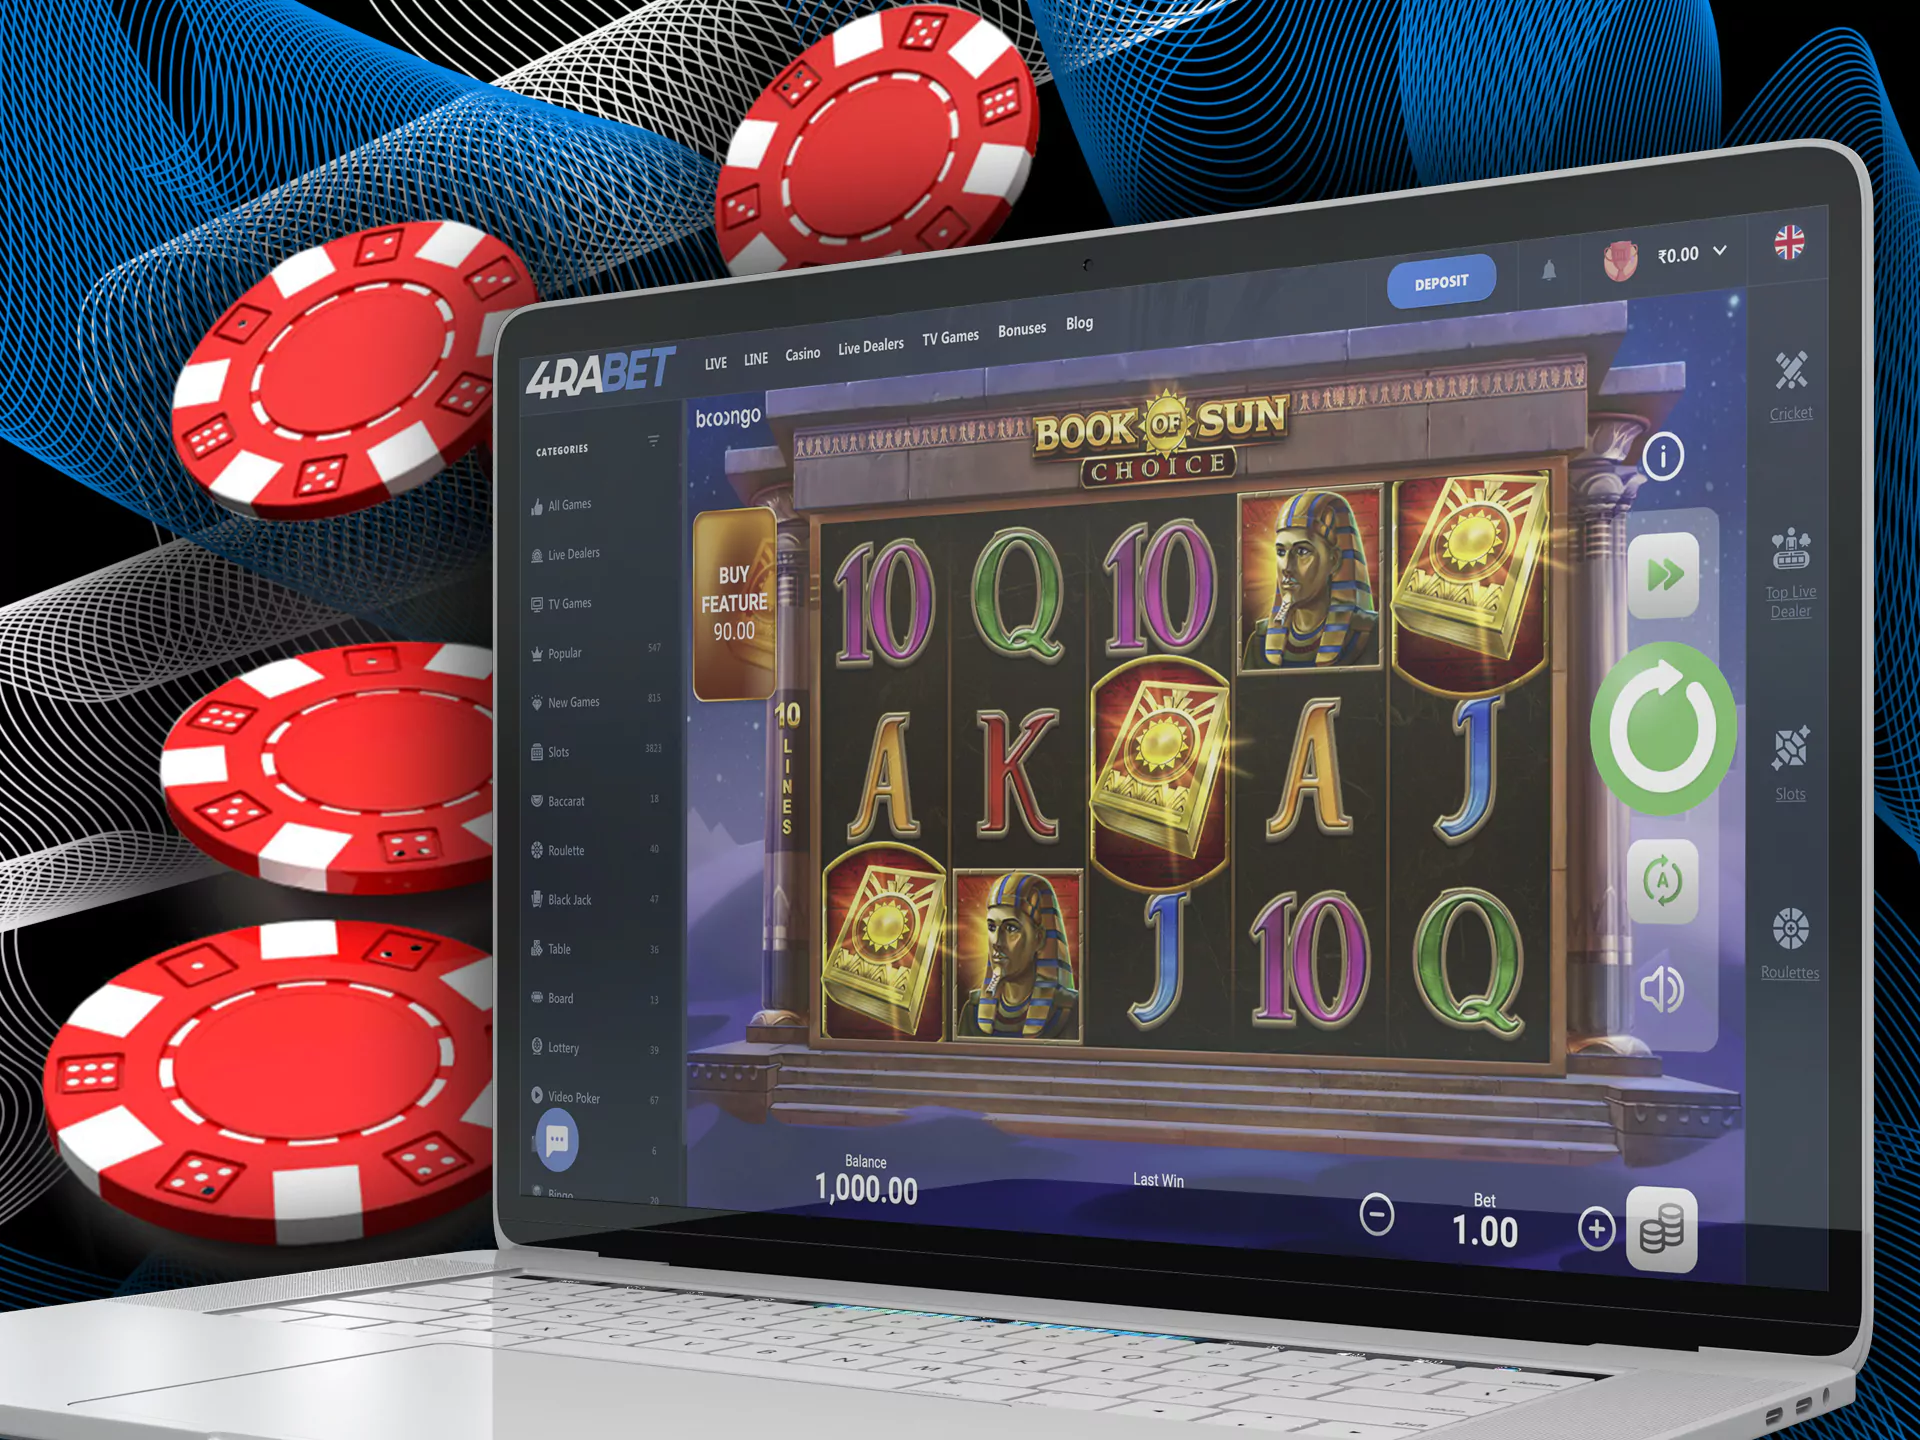 Book of Sun: Choice — one of the most best Casino game at 4rabet Bookie.